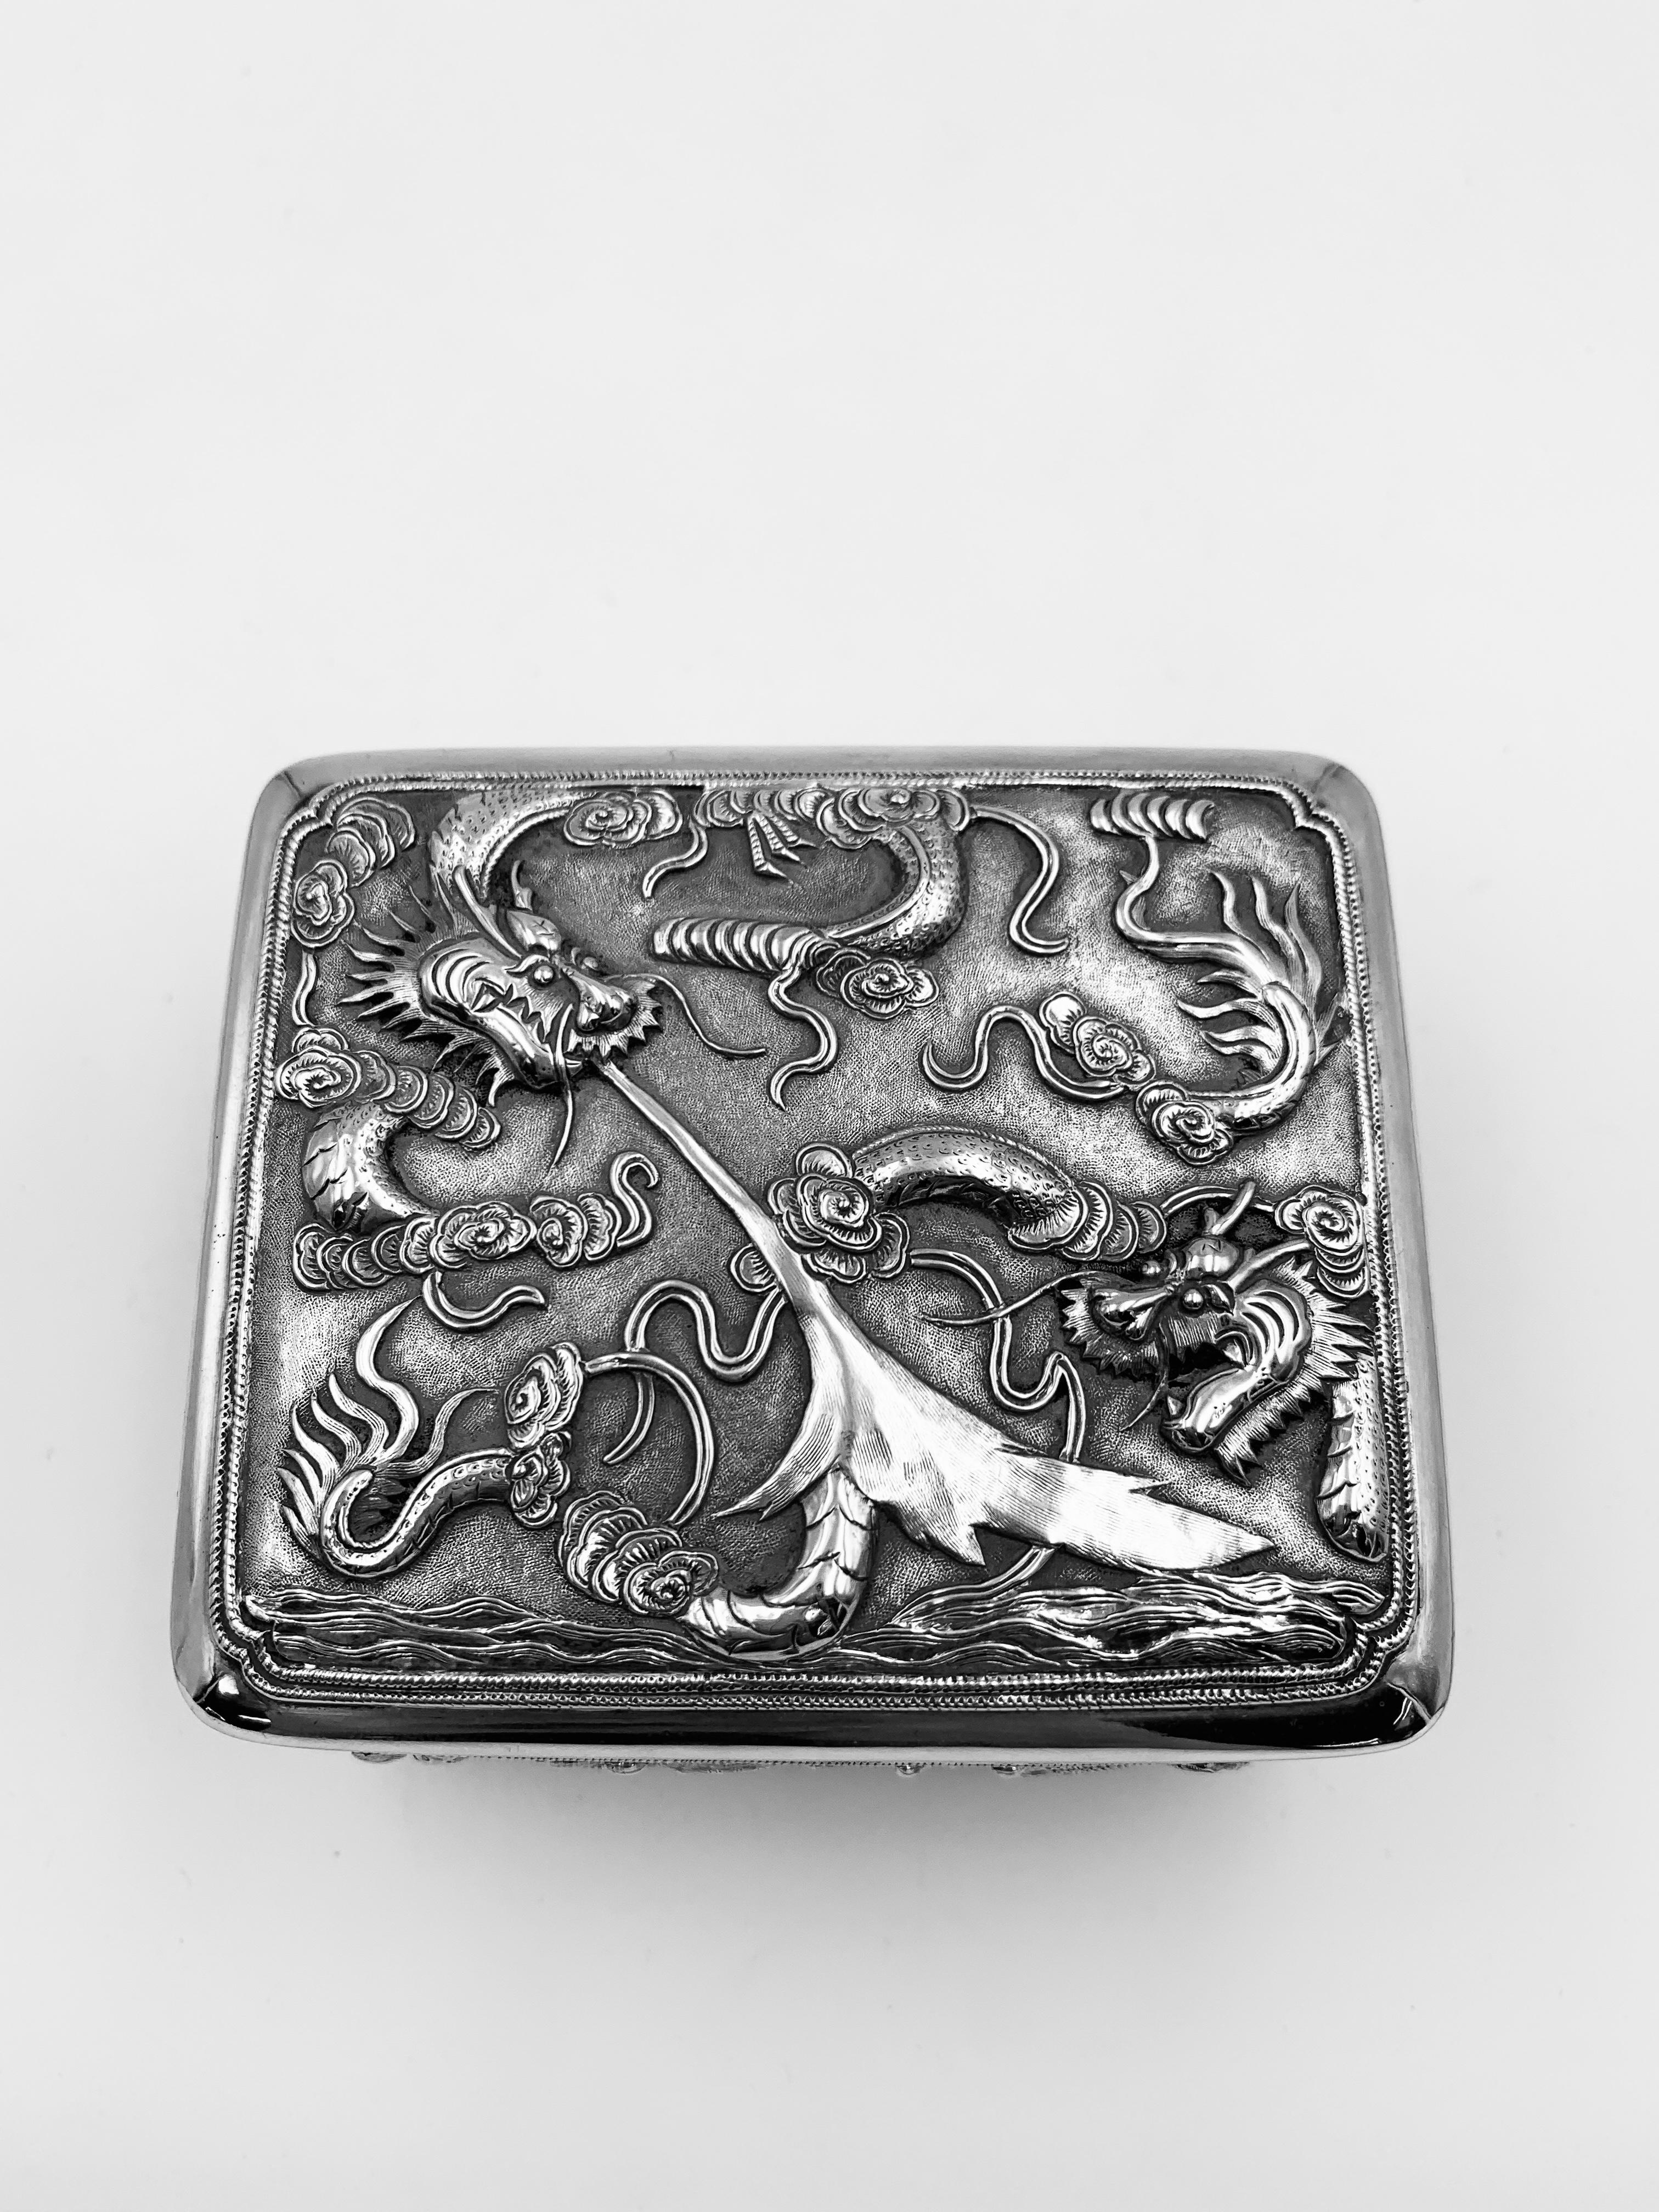 Late 19th Century Chinese Export Silver Box For Sale